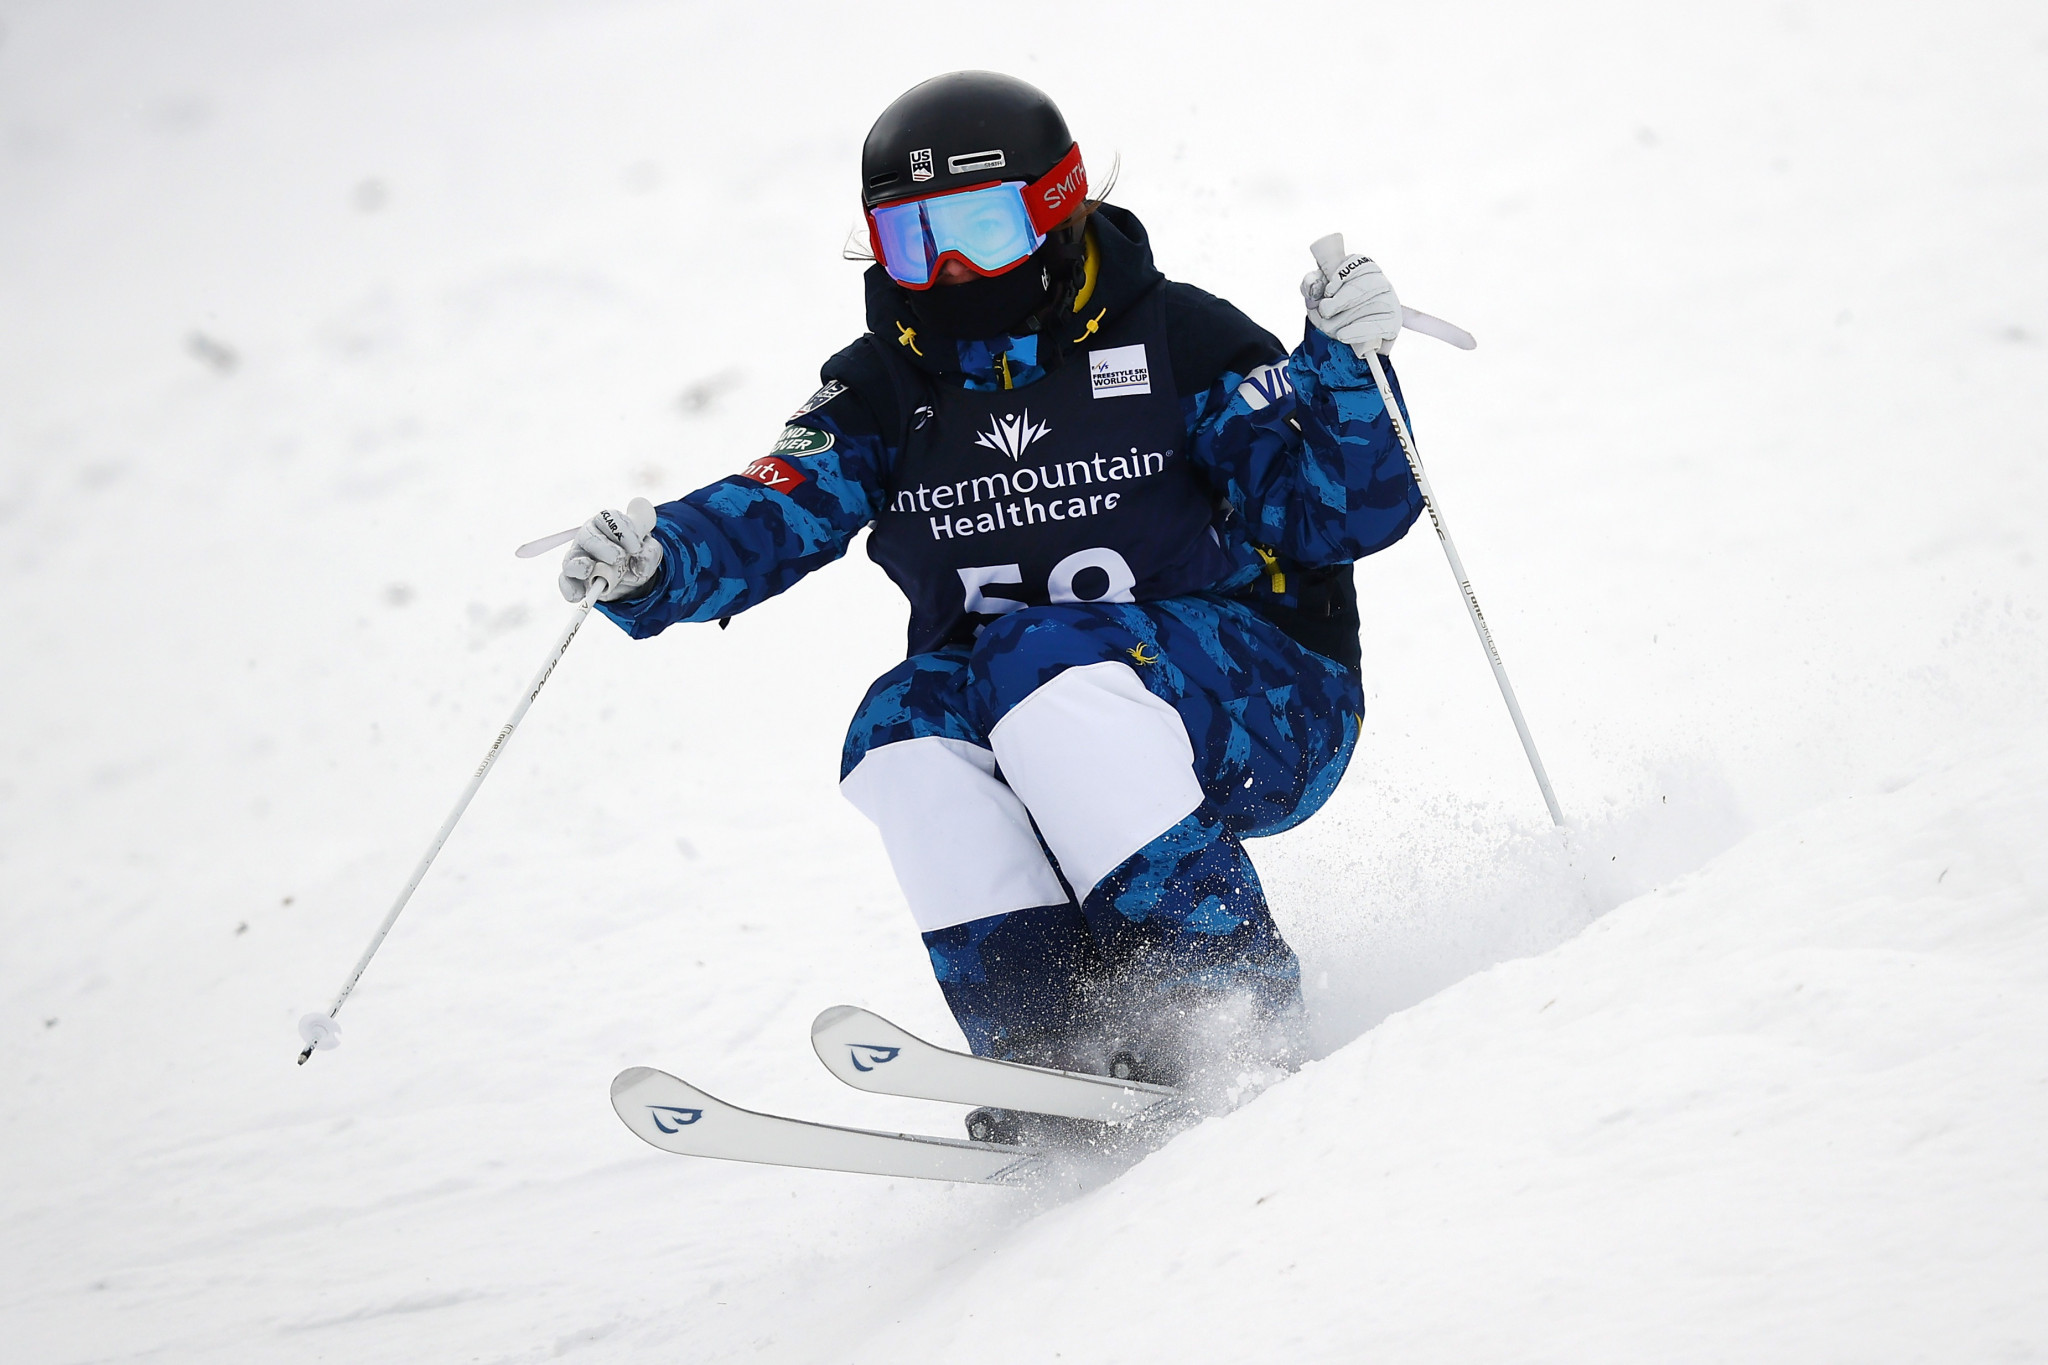 Sabrina Cass claimed the moguls world junior title in 2019 for the United States but will represent Brazil at Beijing 2022 after switching allegiances last year ©Getty Images